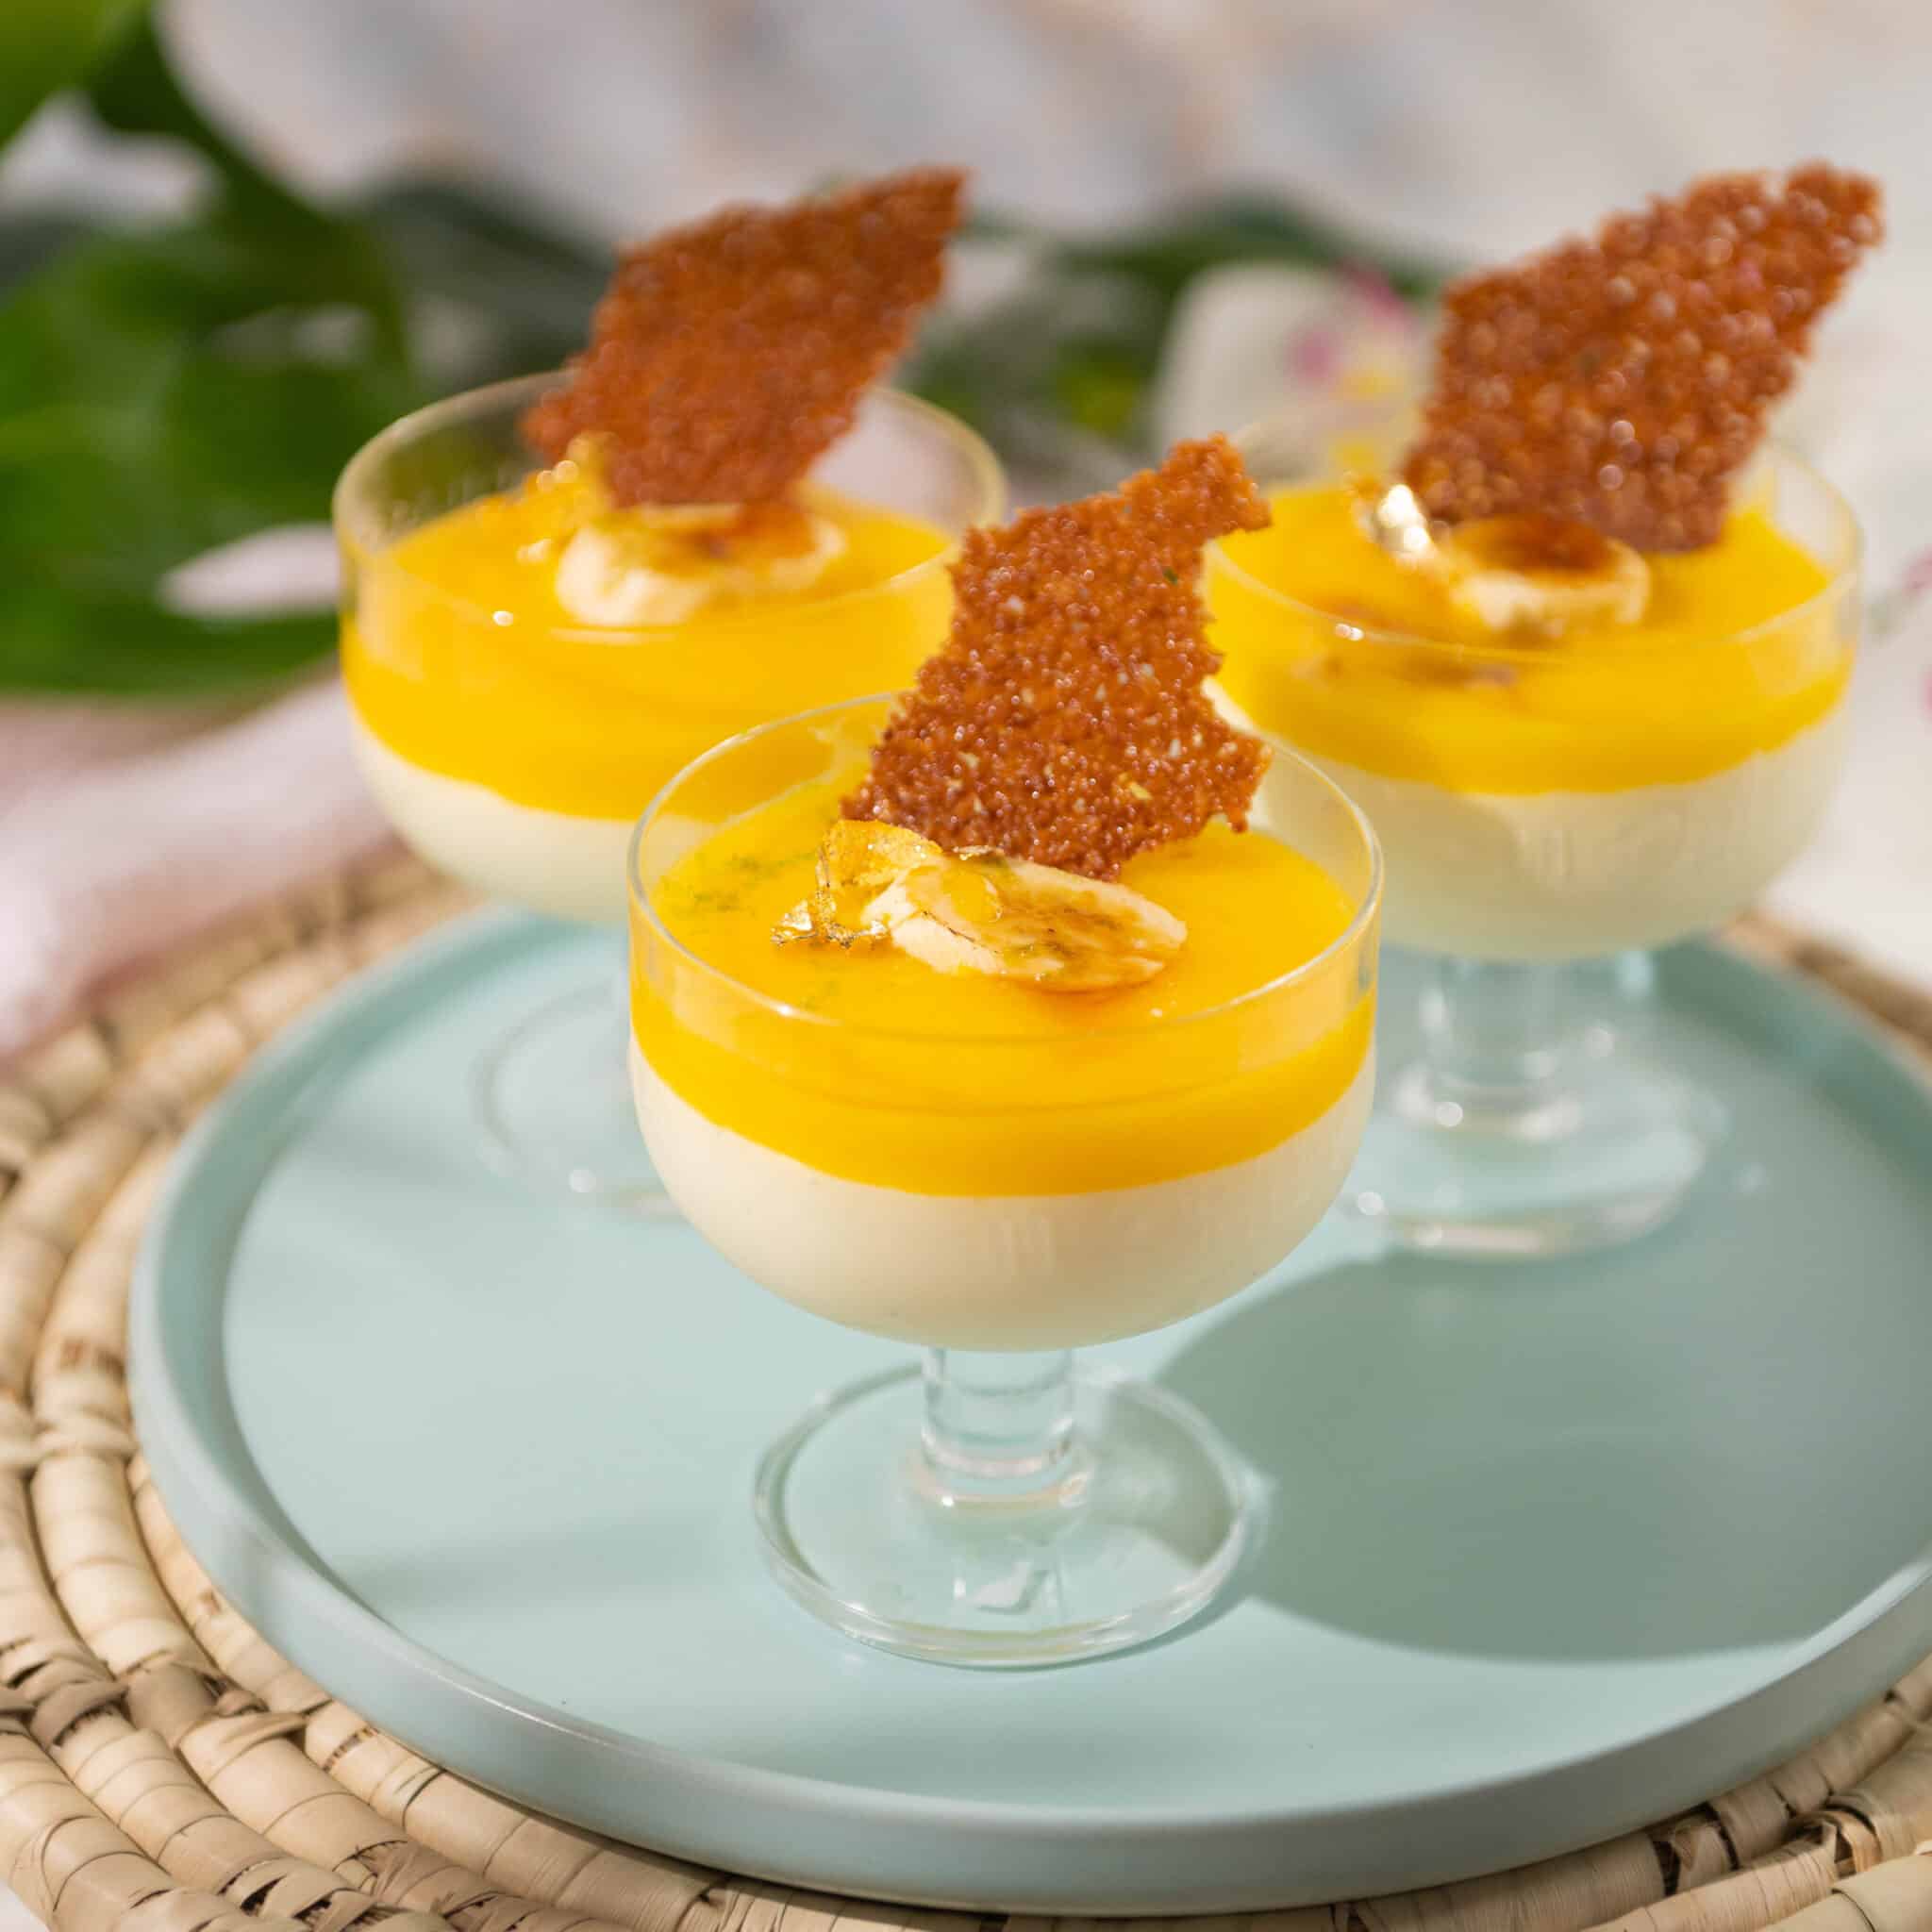 3 cups filled with coconut mousse and mango puree